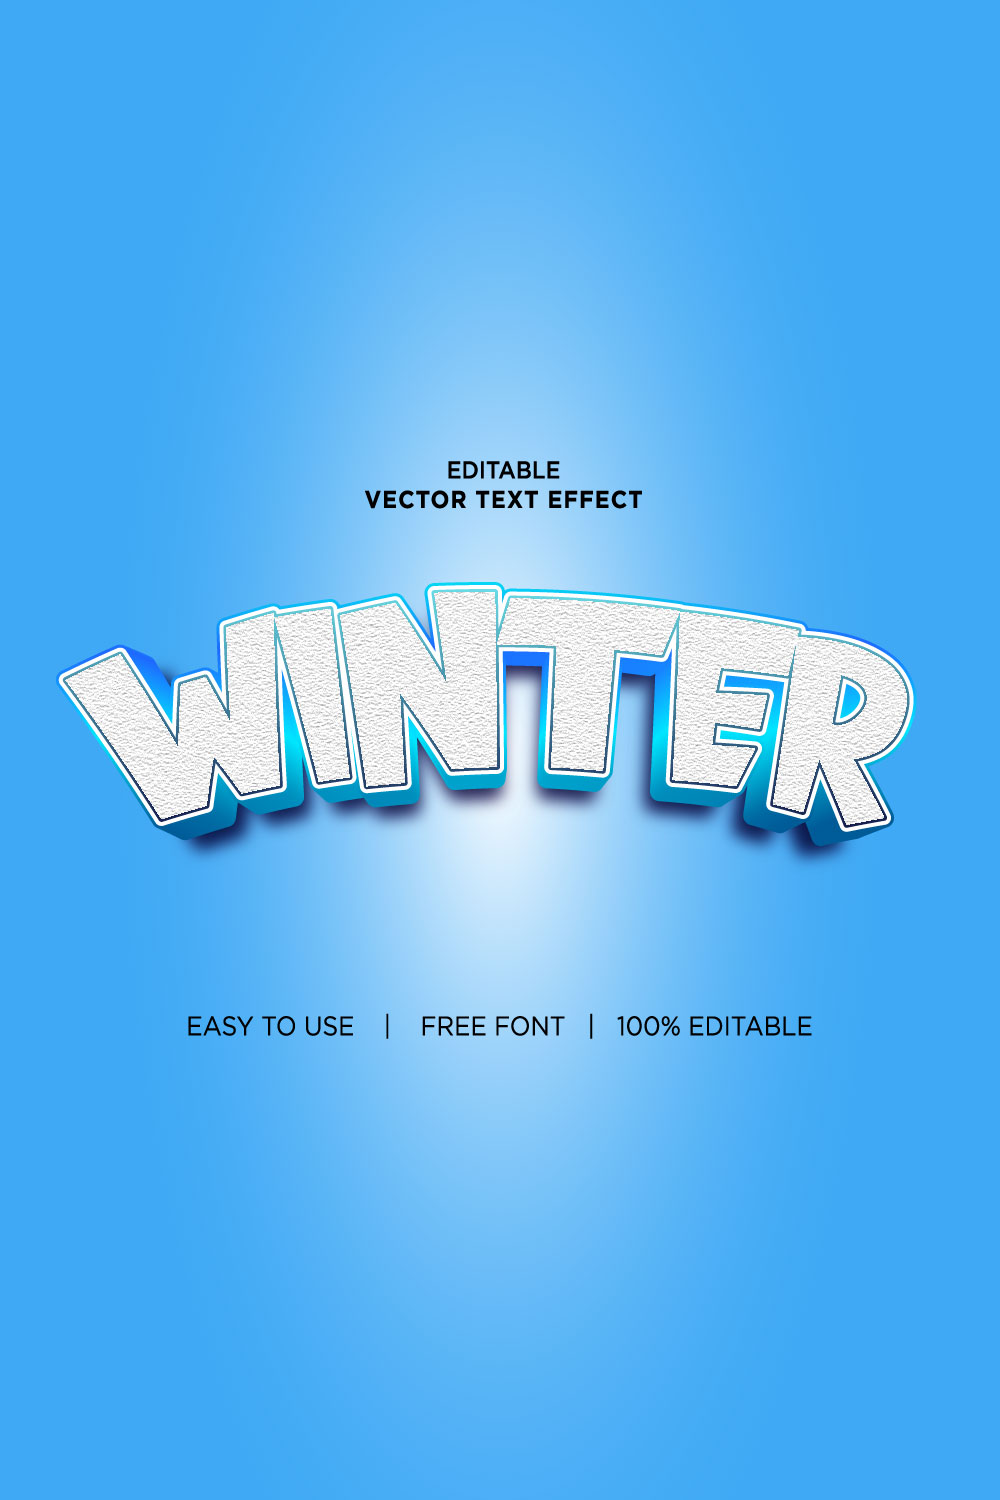 Winter 3d text effects vector illustrations New Text style eps files Editable text effect vector, 3d editable text effect vector pinterest preview image.